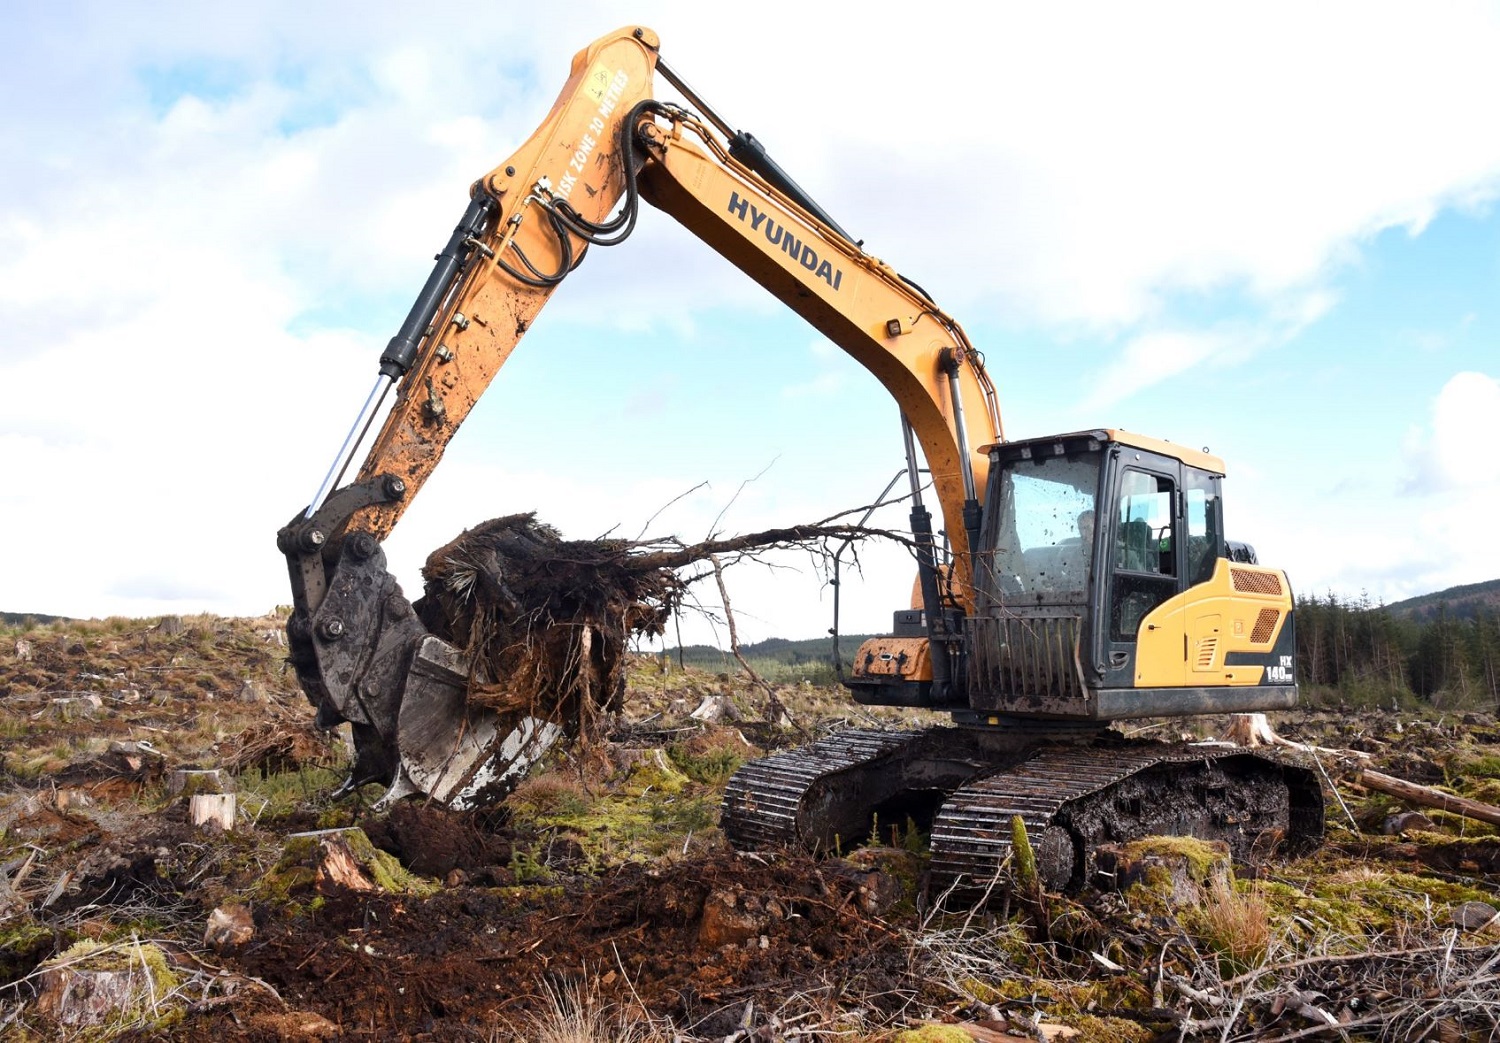 Carron Valley Plant chooses Hyundai High-Walkers for tough forestry tasks